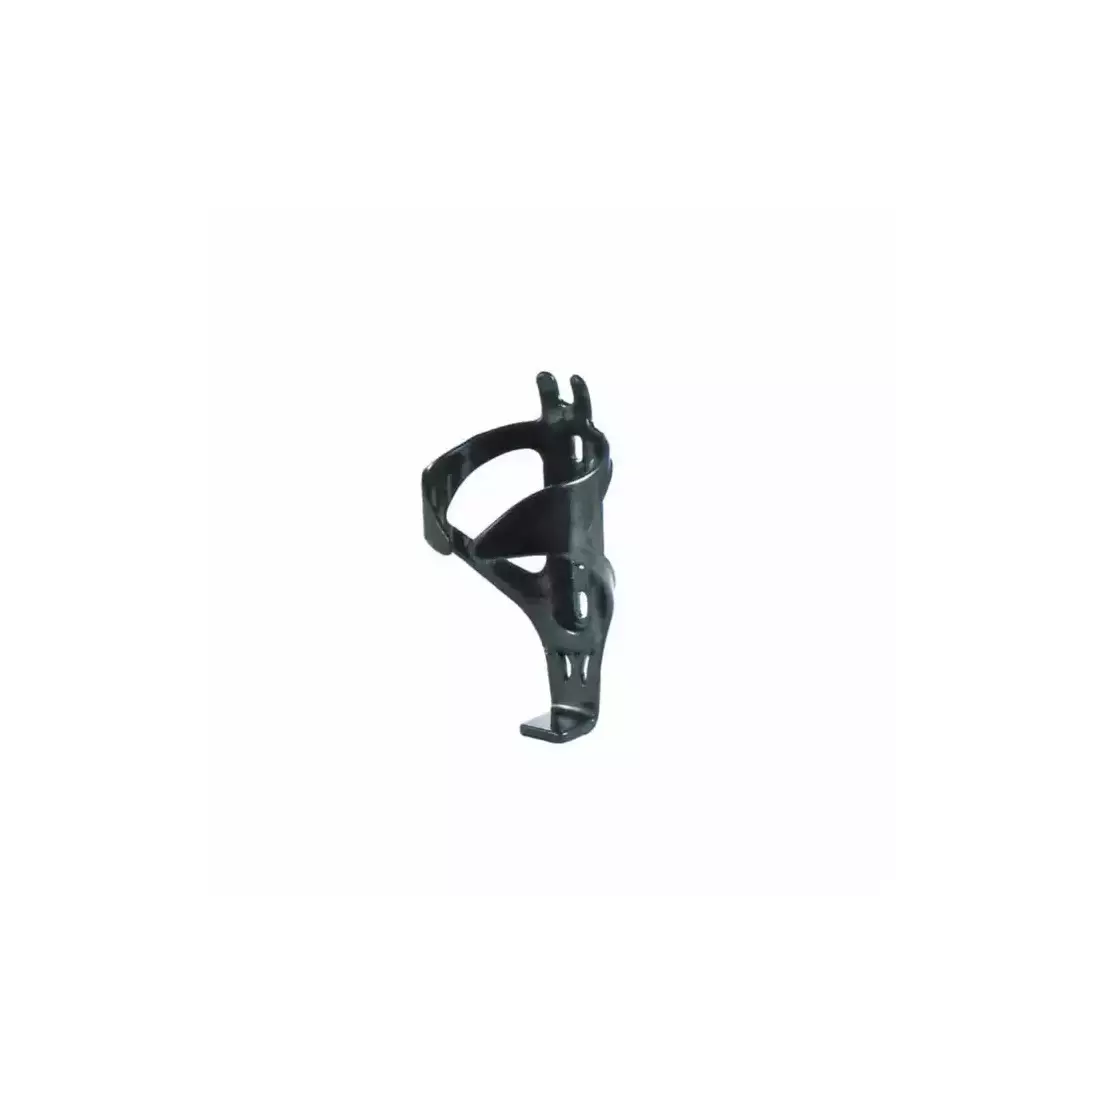 SPENCER bicycle water bottle cage JY-9002/BC18, black 